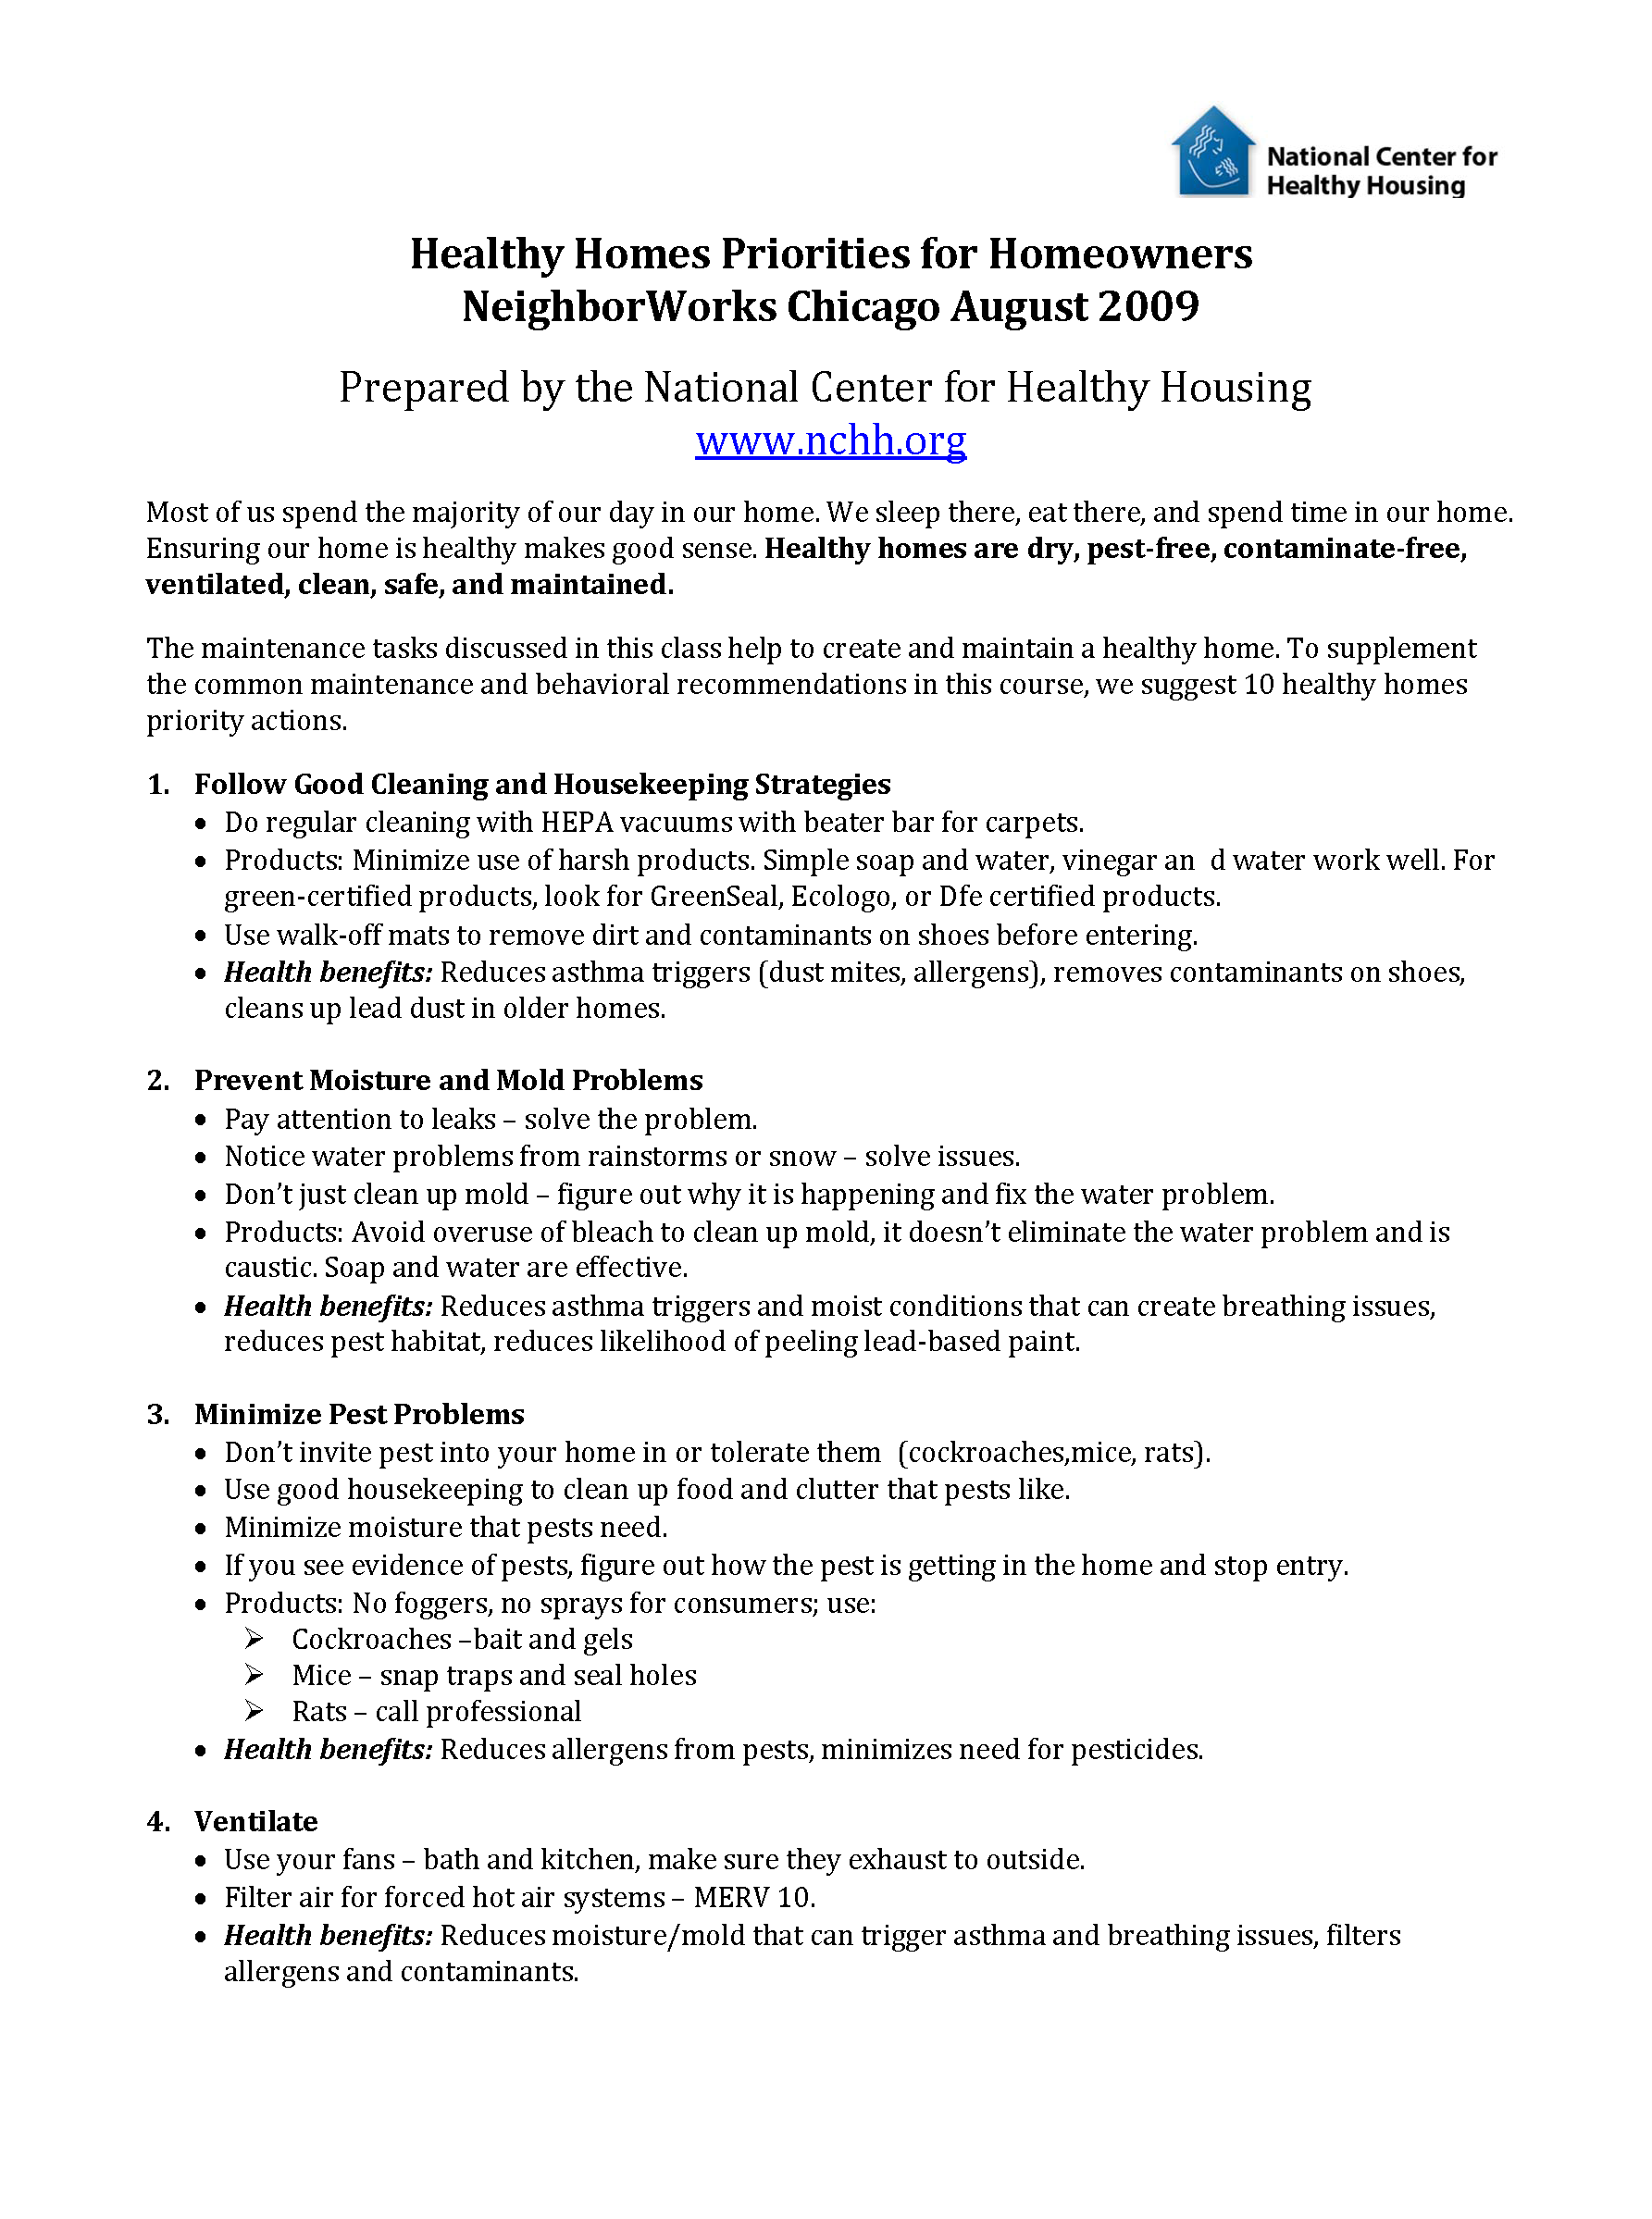 Fact Sheet - Healthy Homes Priorities for Homeowners - NeighborWorks Chicago 2009